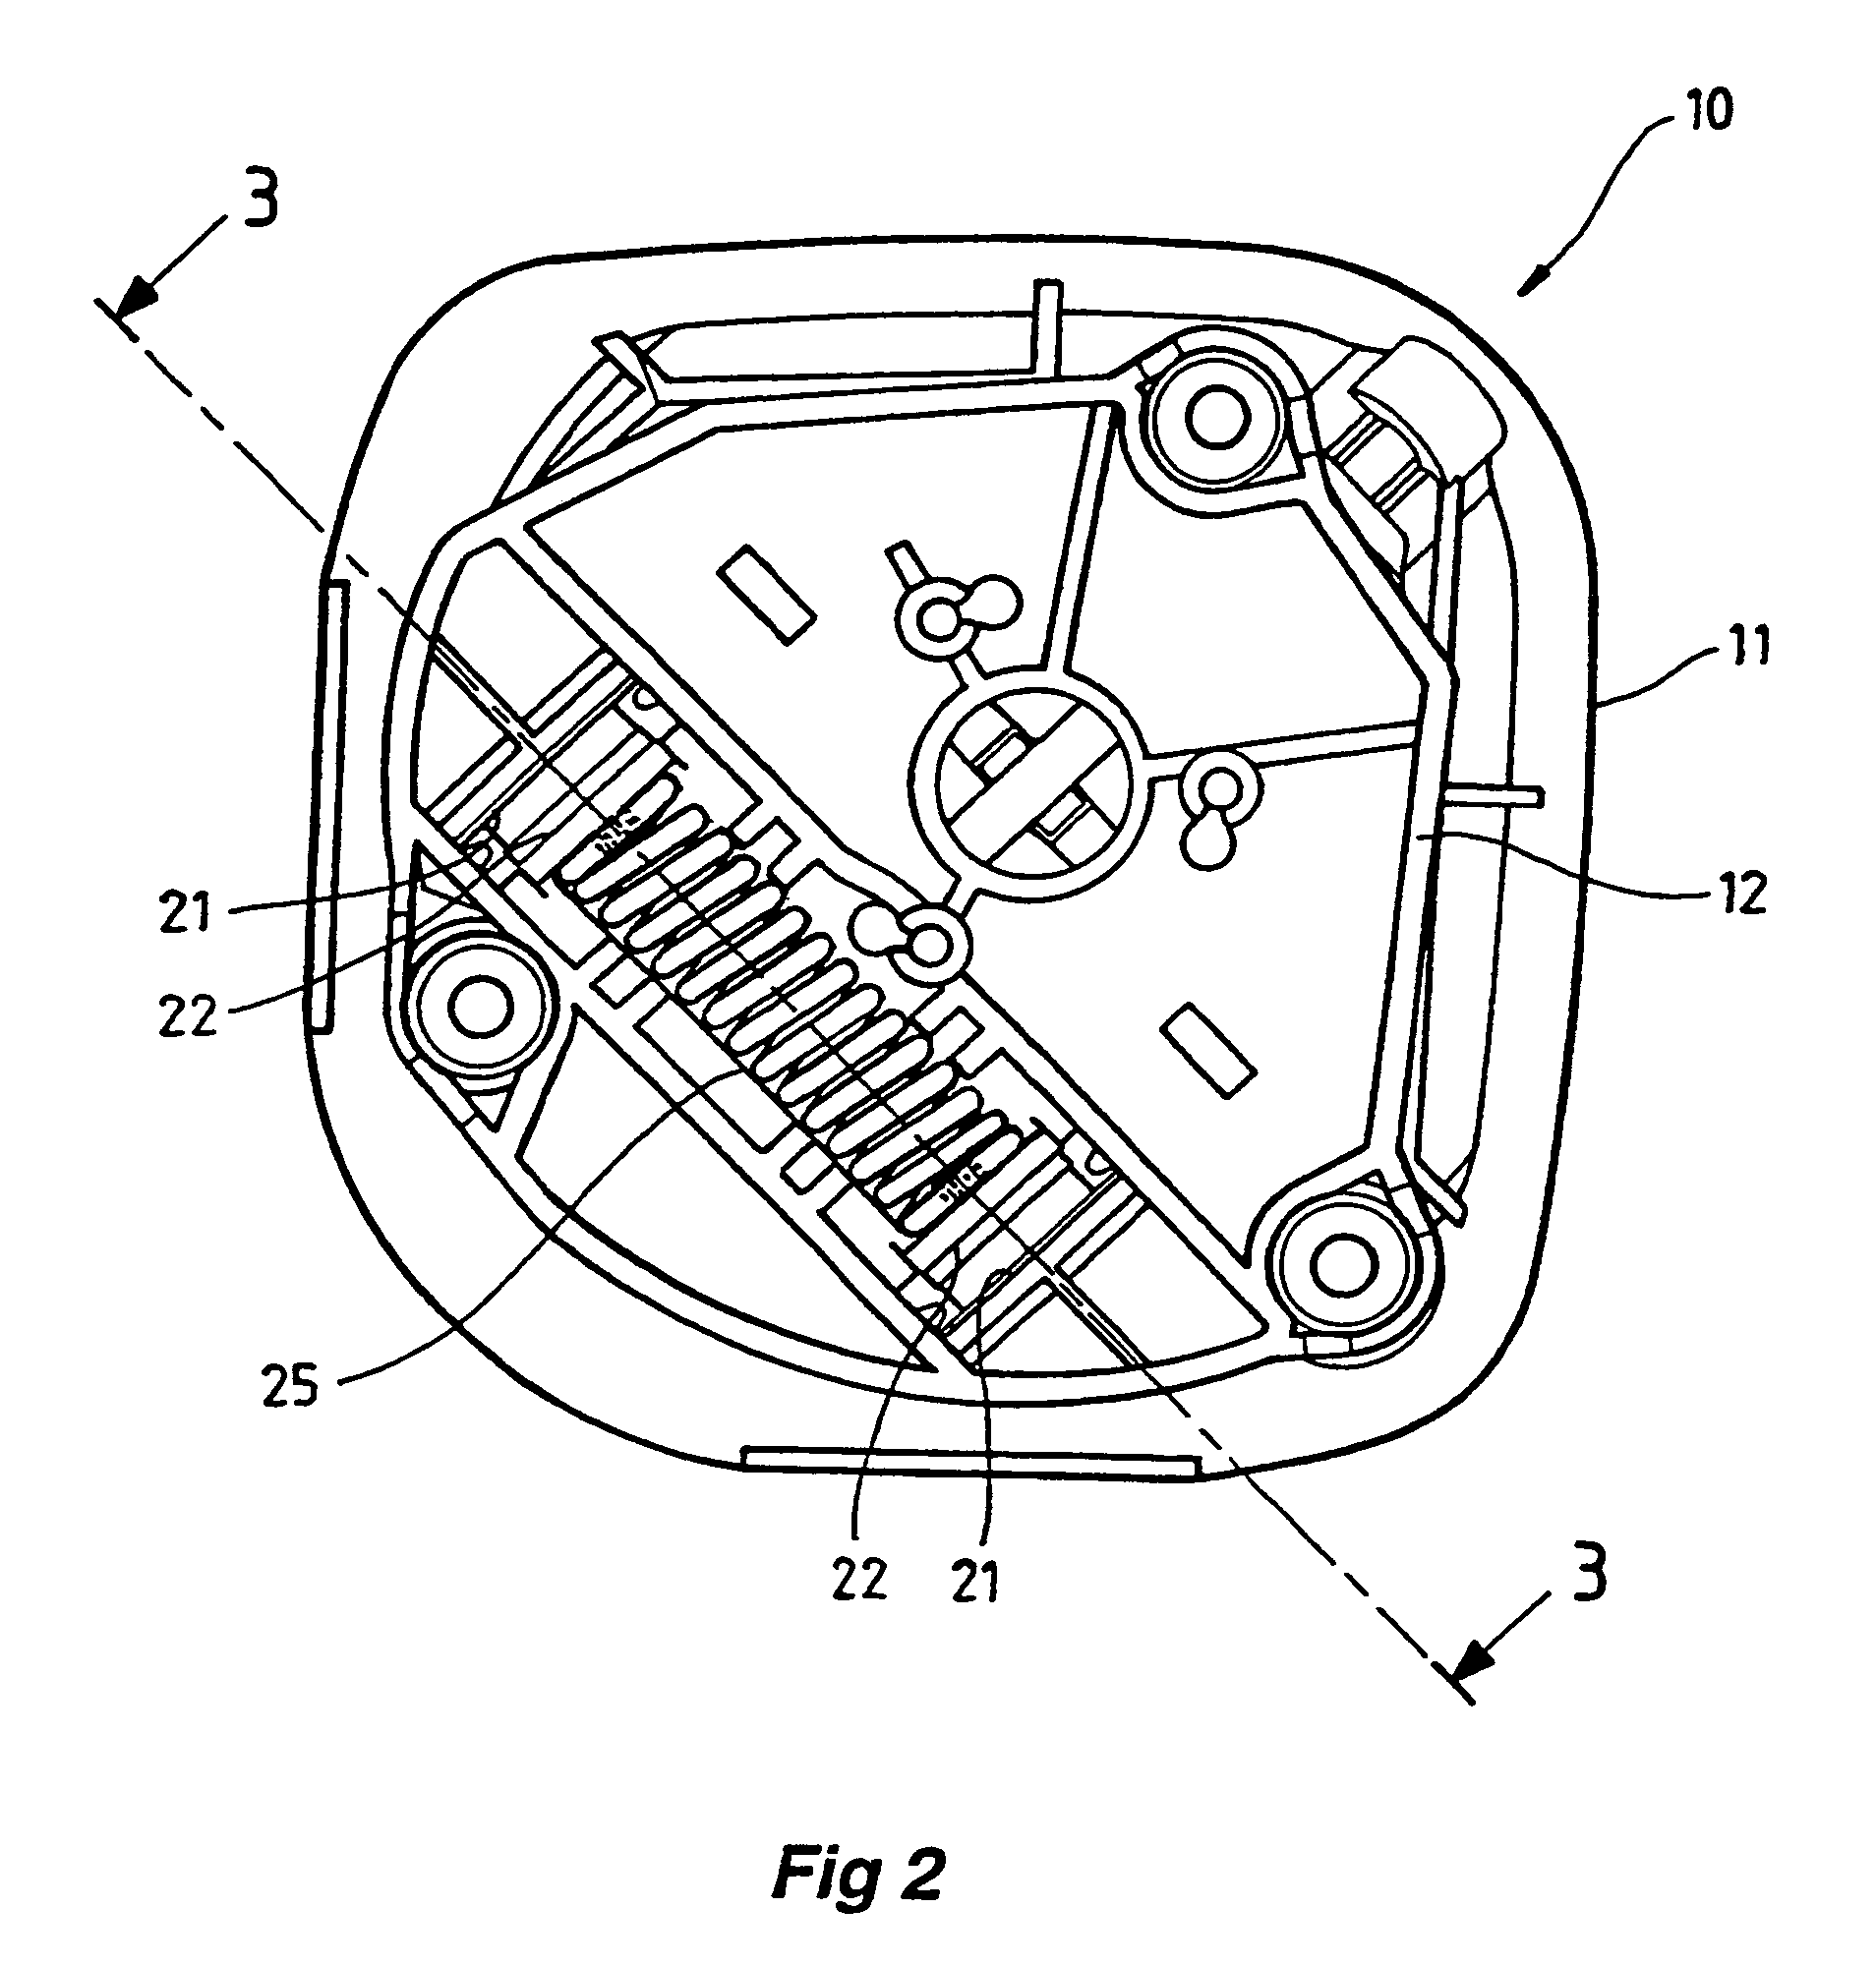 Mirror mounting assembly for controlling vibration of a mirror